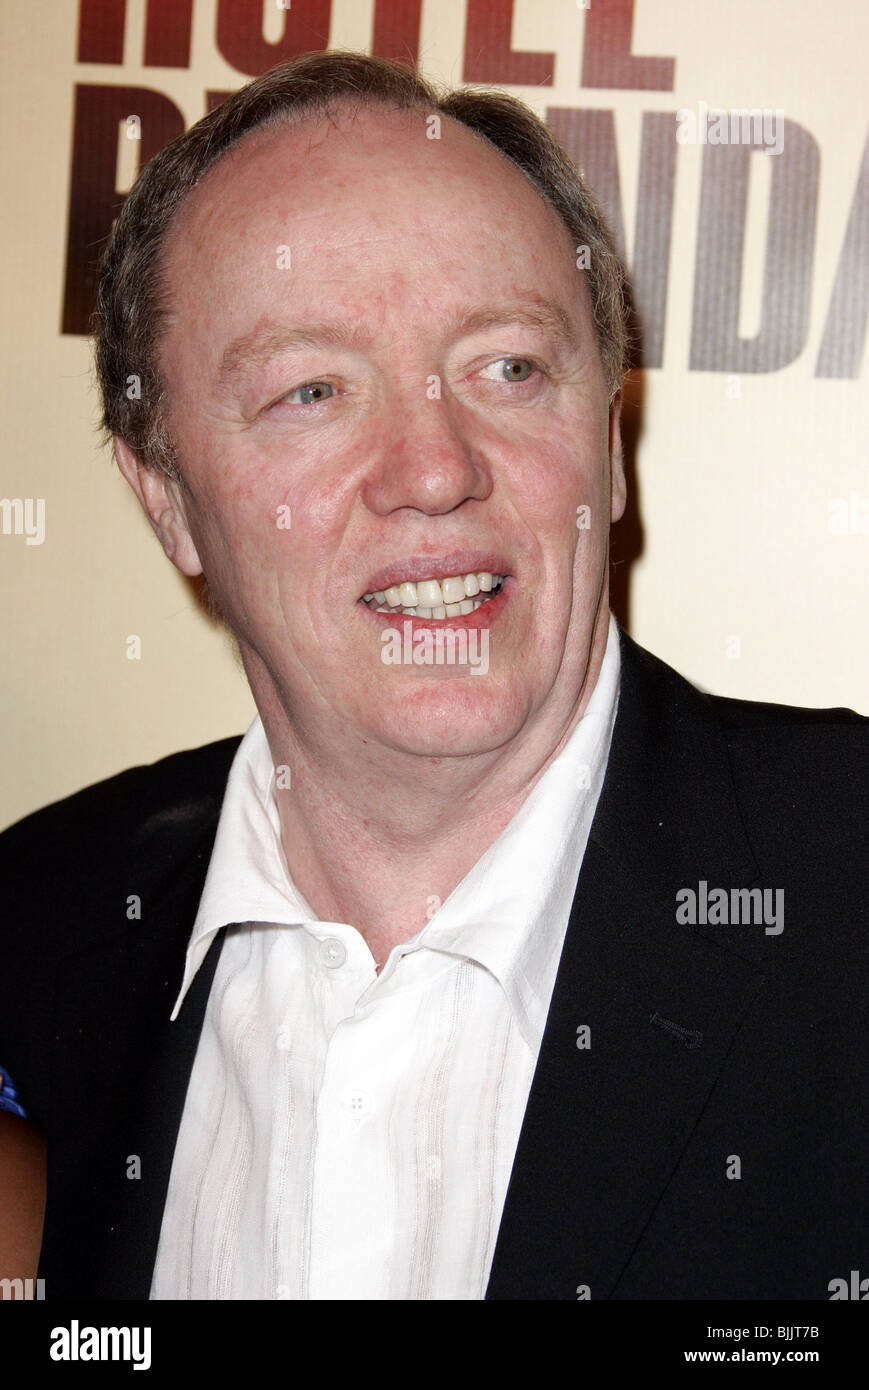 TERRY GEORGE HOTEL RWANDA FILM PREMIERE ACADEMY OF MOTION PICTURE ARTS BEVERLY HILLS LOS ANGELES U 02 December 2004 Stock Photo